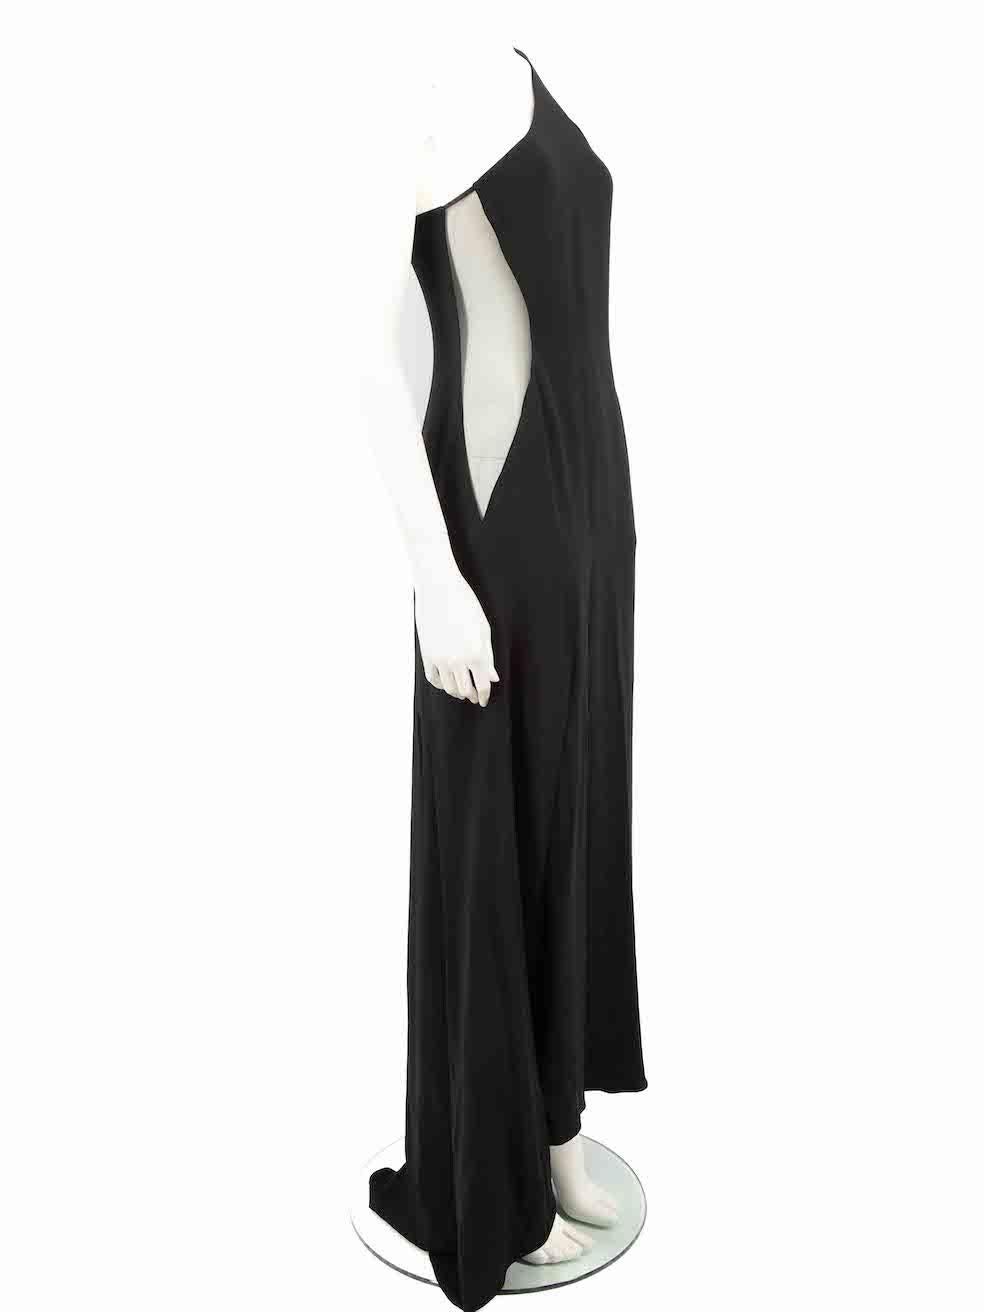 CONDITION is Very good. Minimal wear to dress is evident. Minimal scuff lines to back of hemline. Composition label has been removed on this used Stella McCartney designer resale item.
 
 Details
 Black
 Synthetic
 Dress
 Asymmetric
 One shoulder
